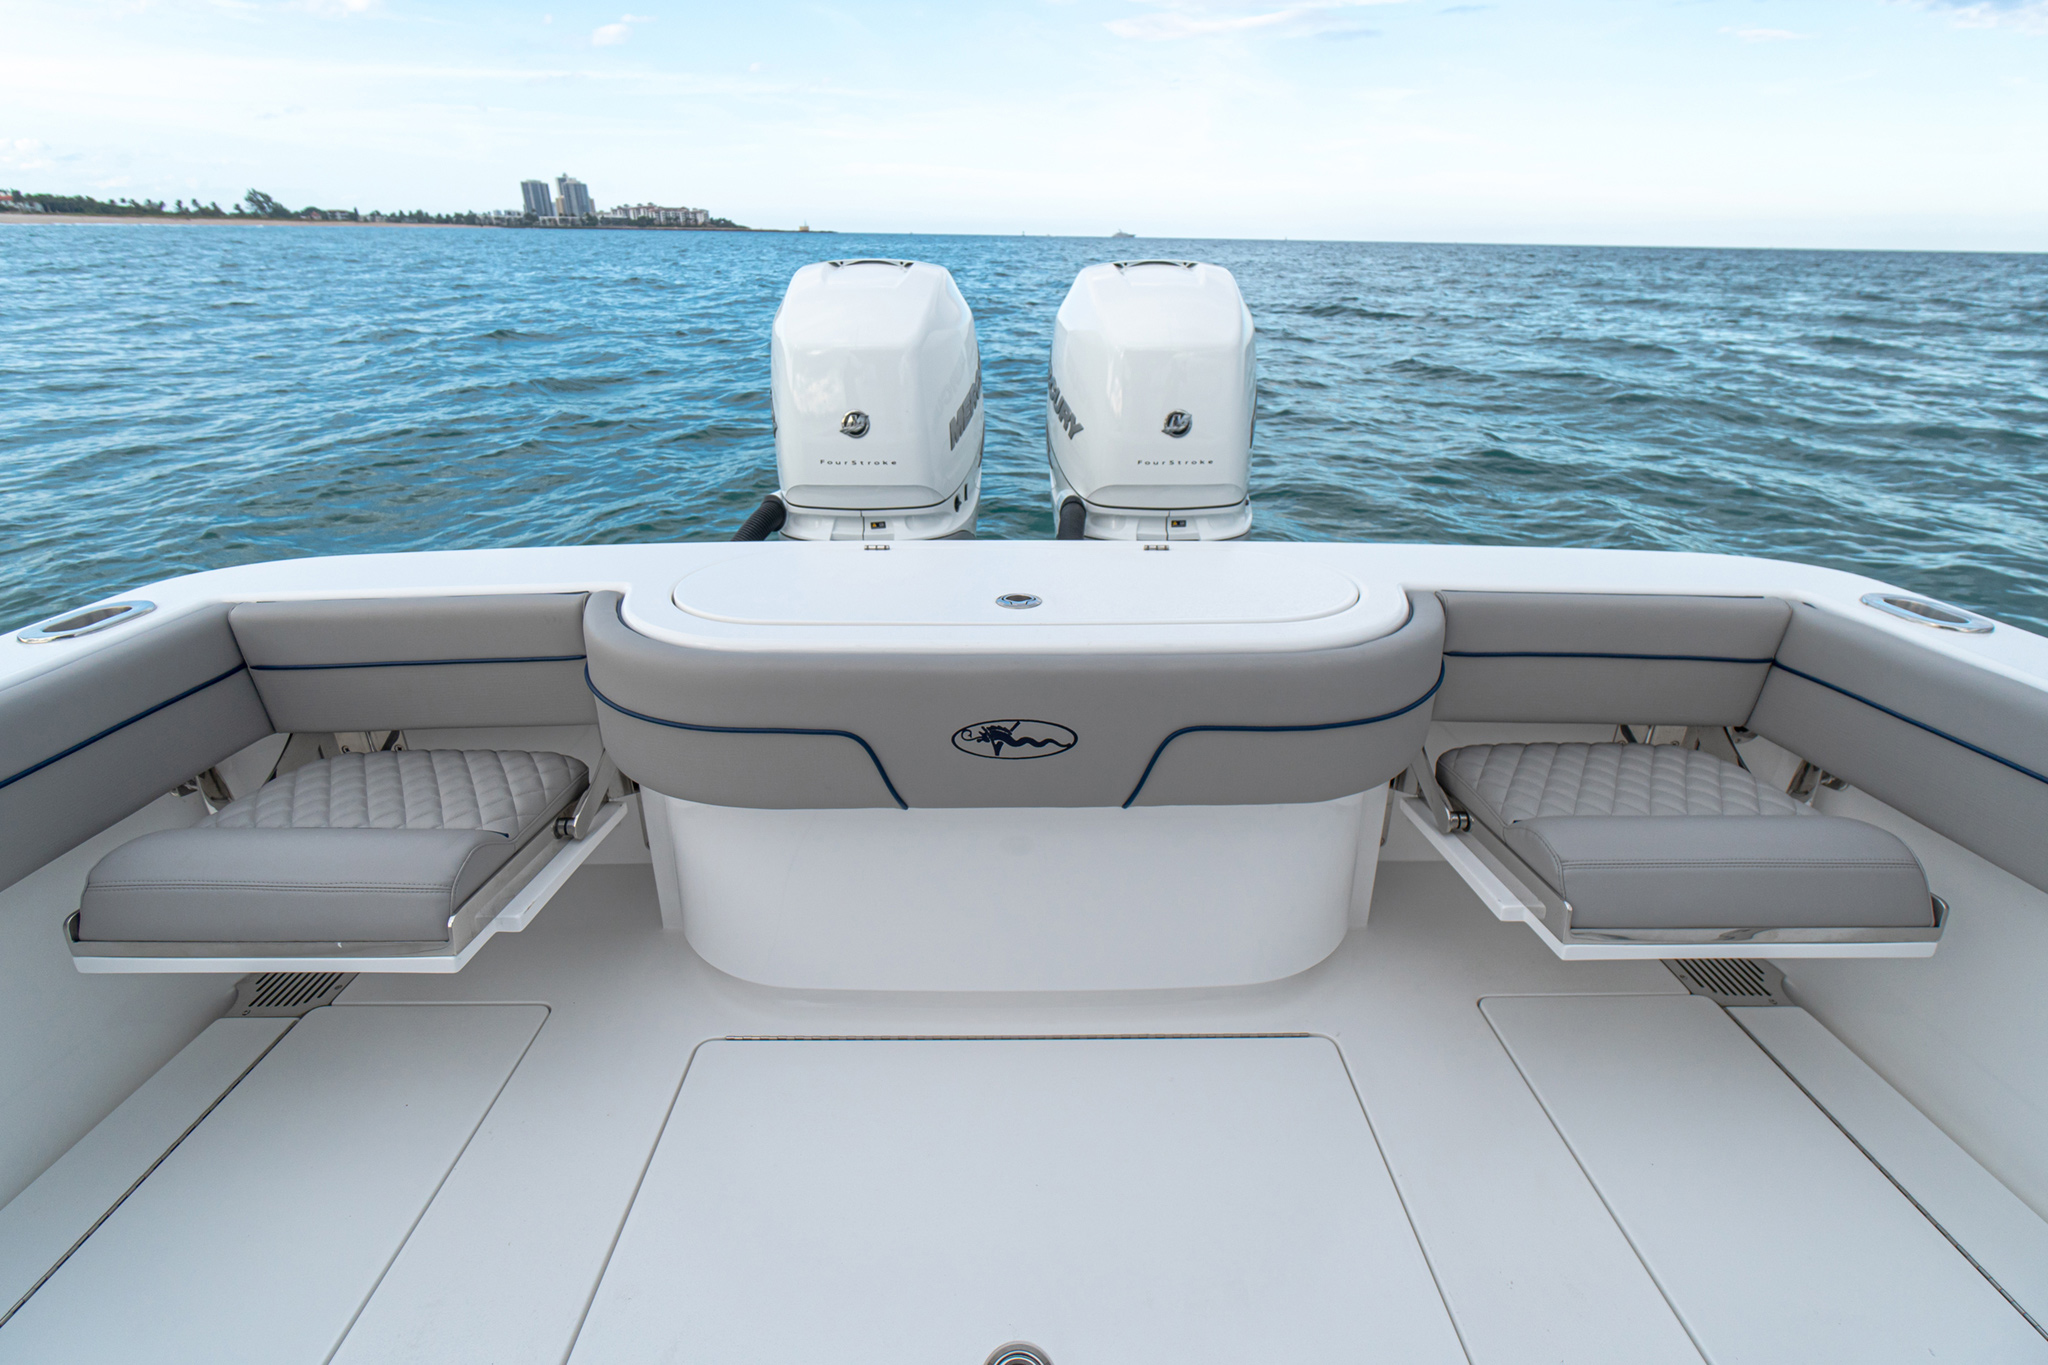 Available GG Schmitt transom seats fold away quickly.